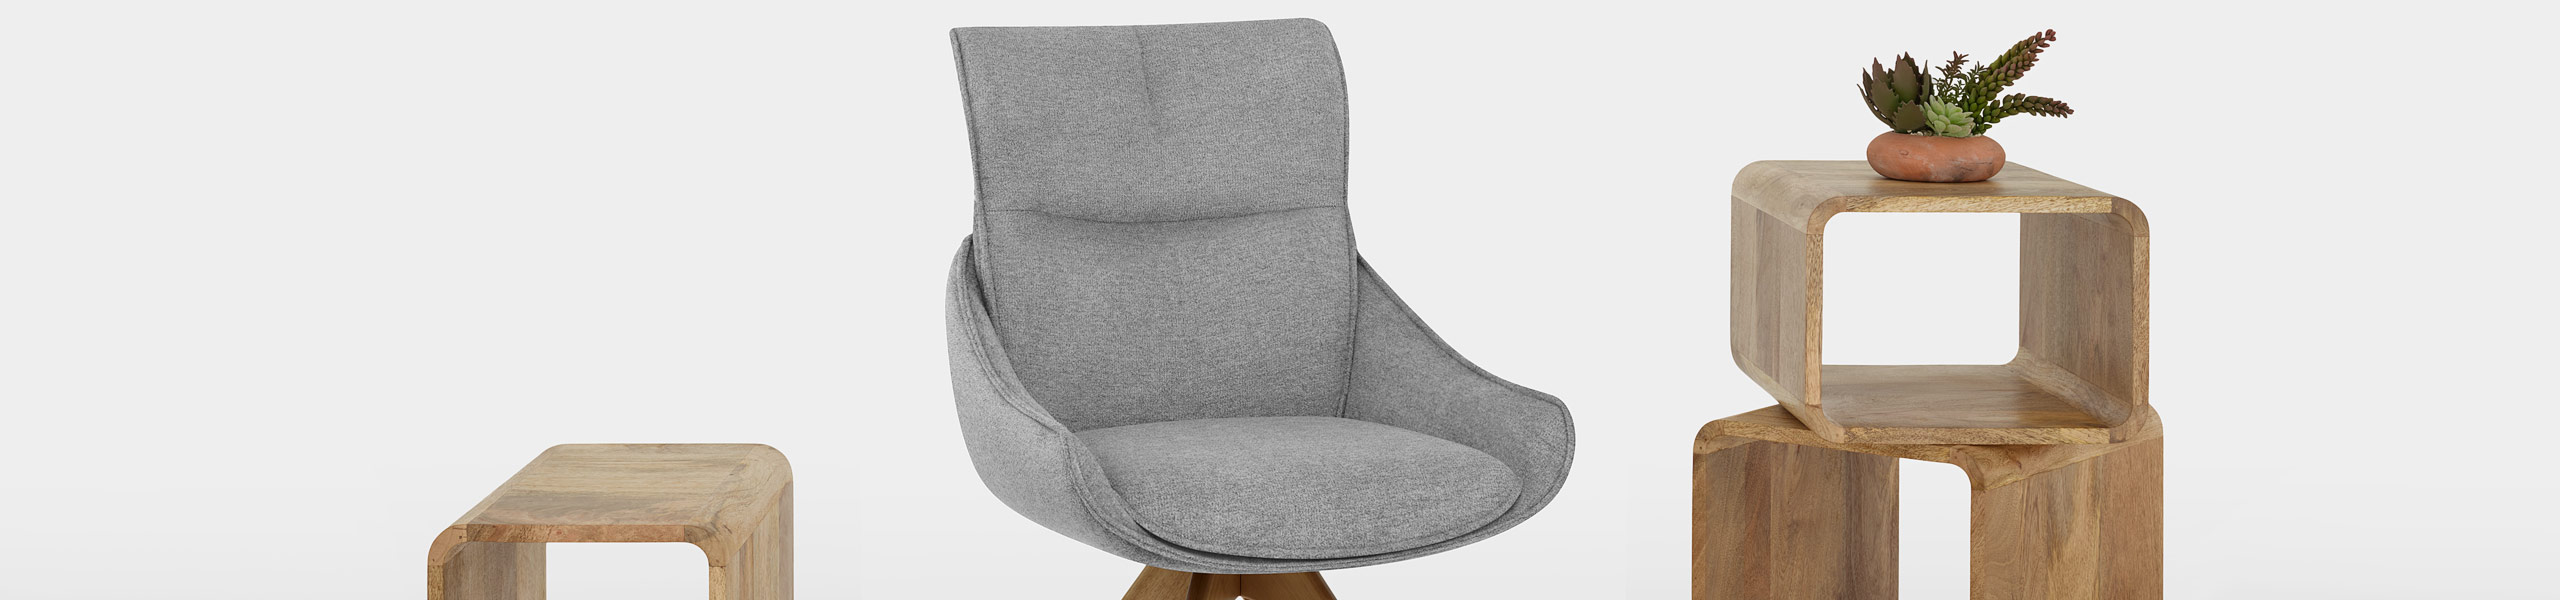 Creed Wooden Dining Chair Light Grey Fabric Video Banner